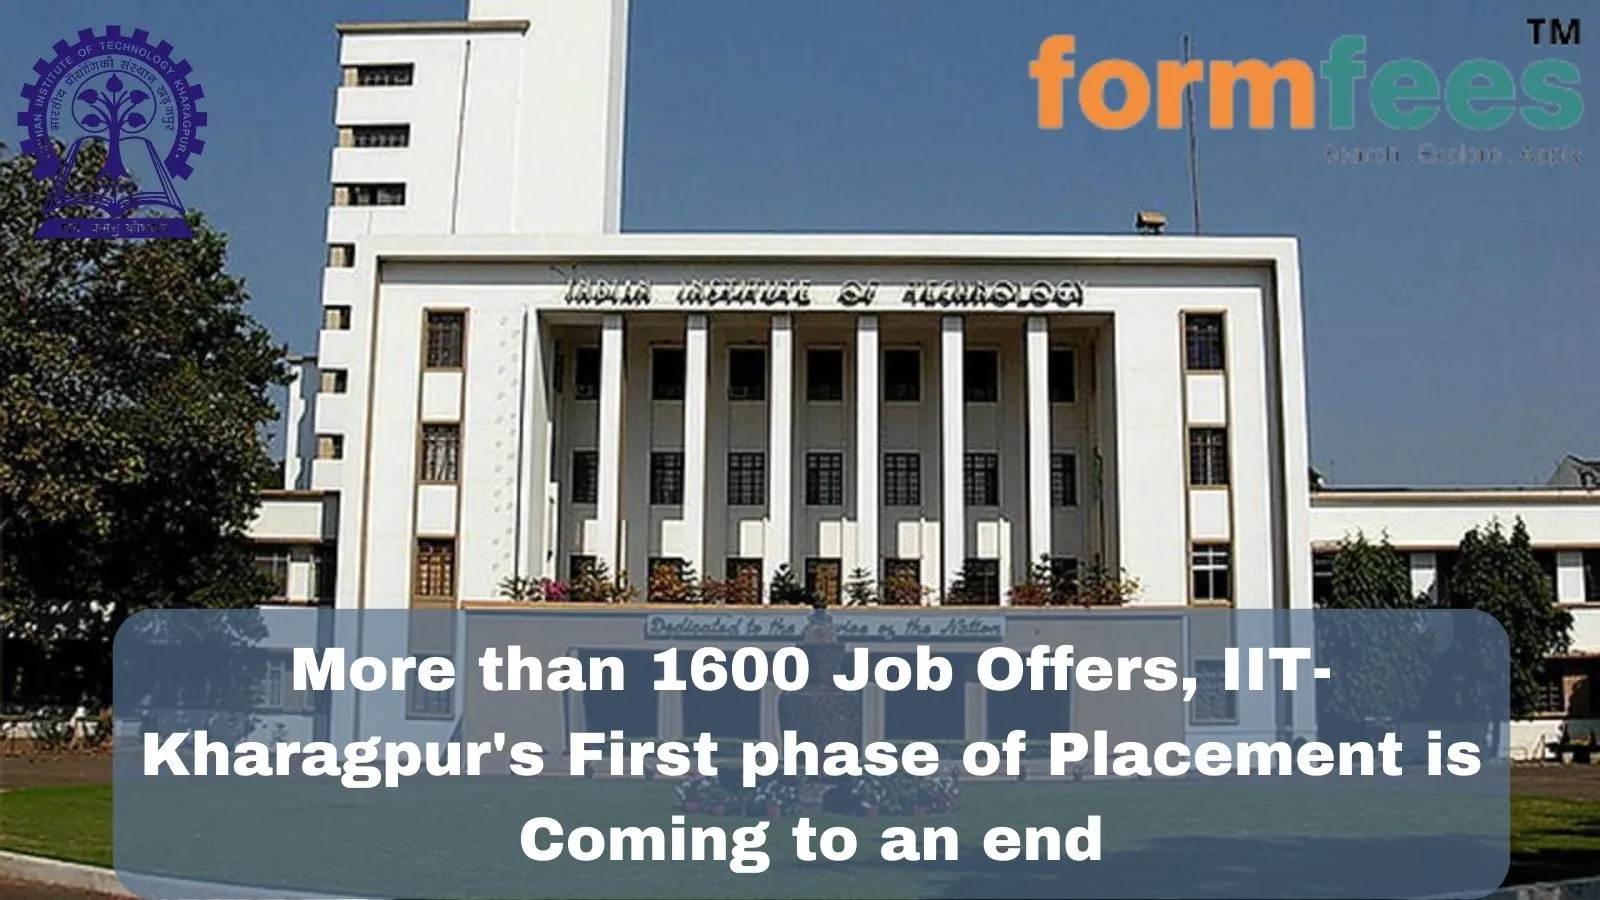 More than 1600 Job Offers, IIT-Kharagpur's First phase of Placement is Coming to an end